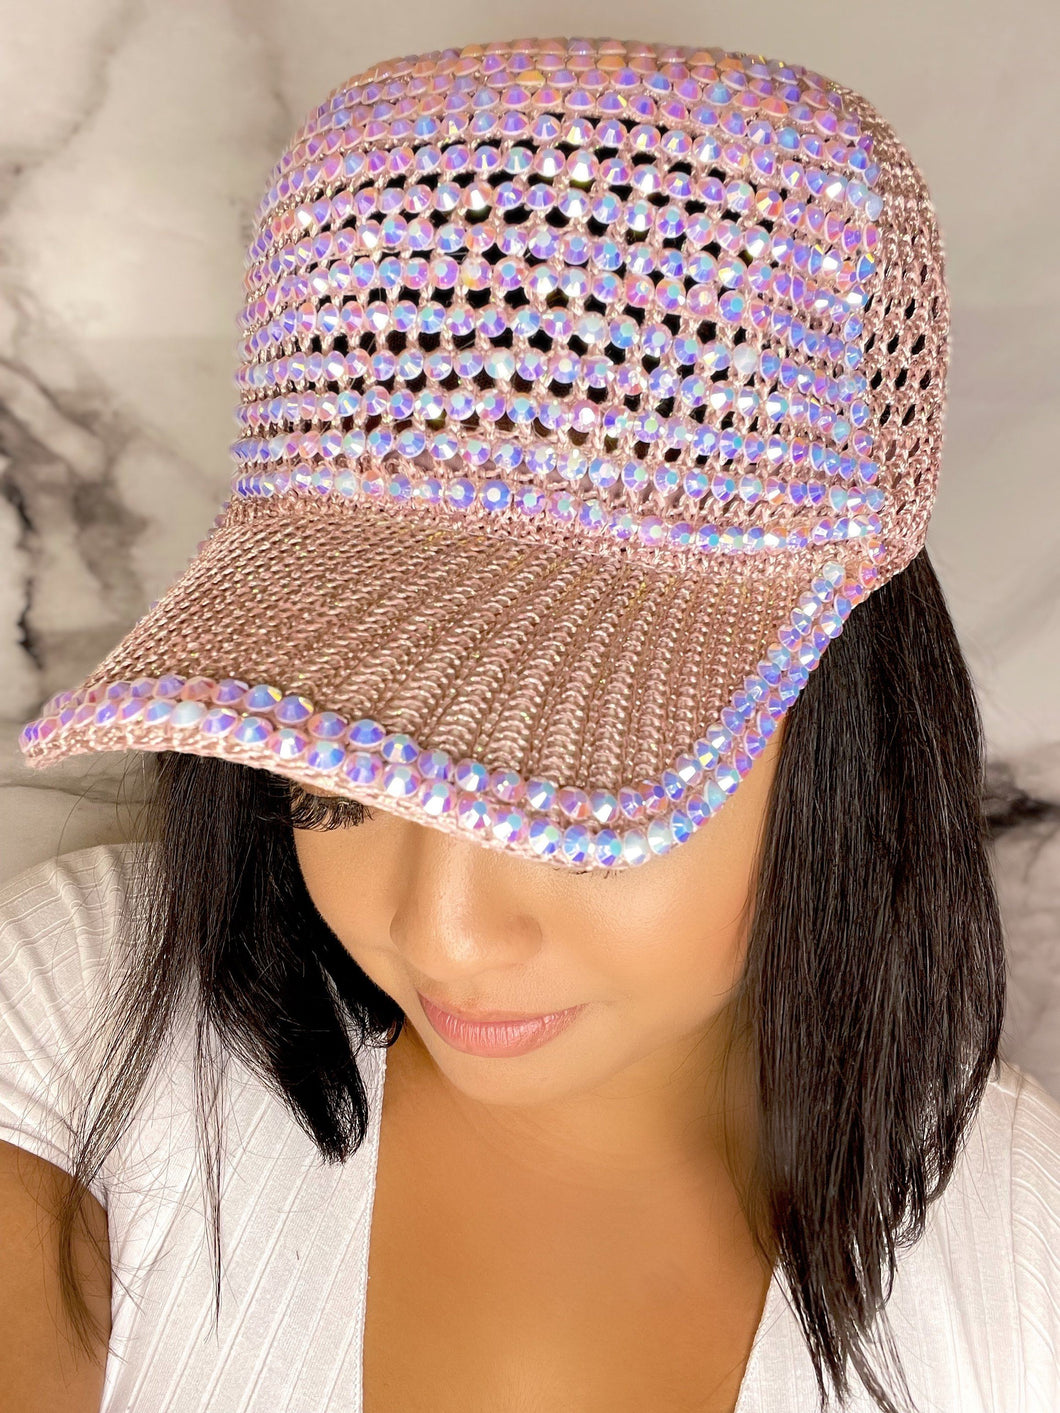 Glam Hat - Cotton Candy Glam Hat